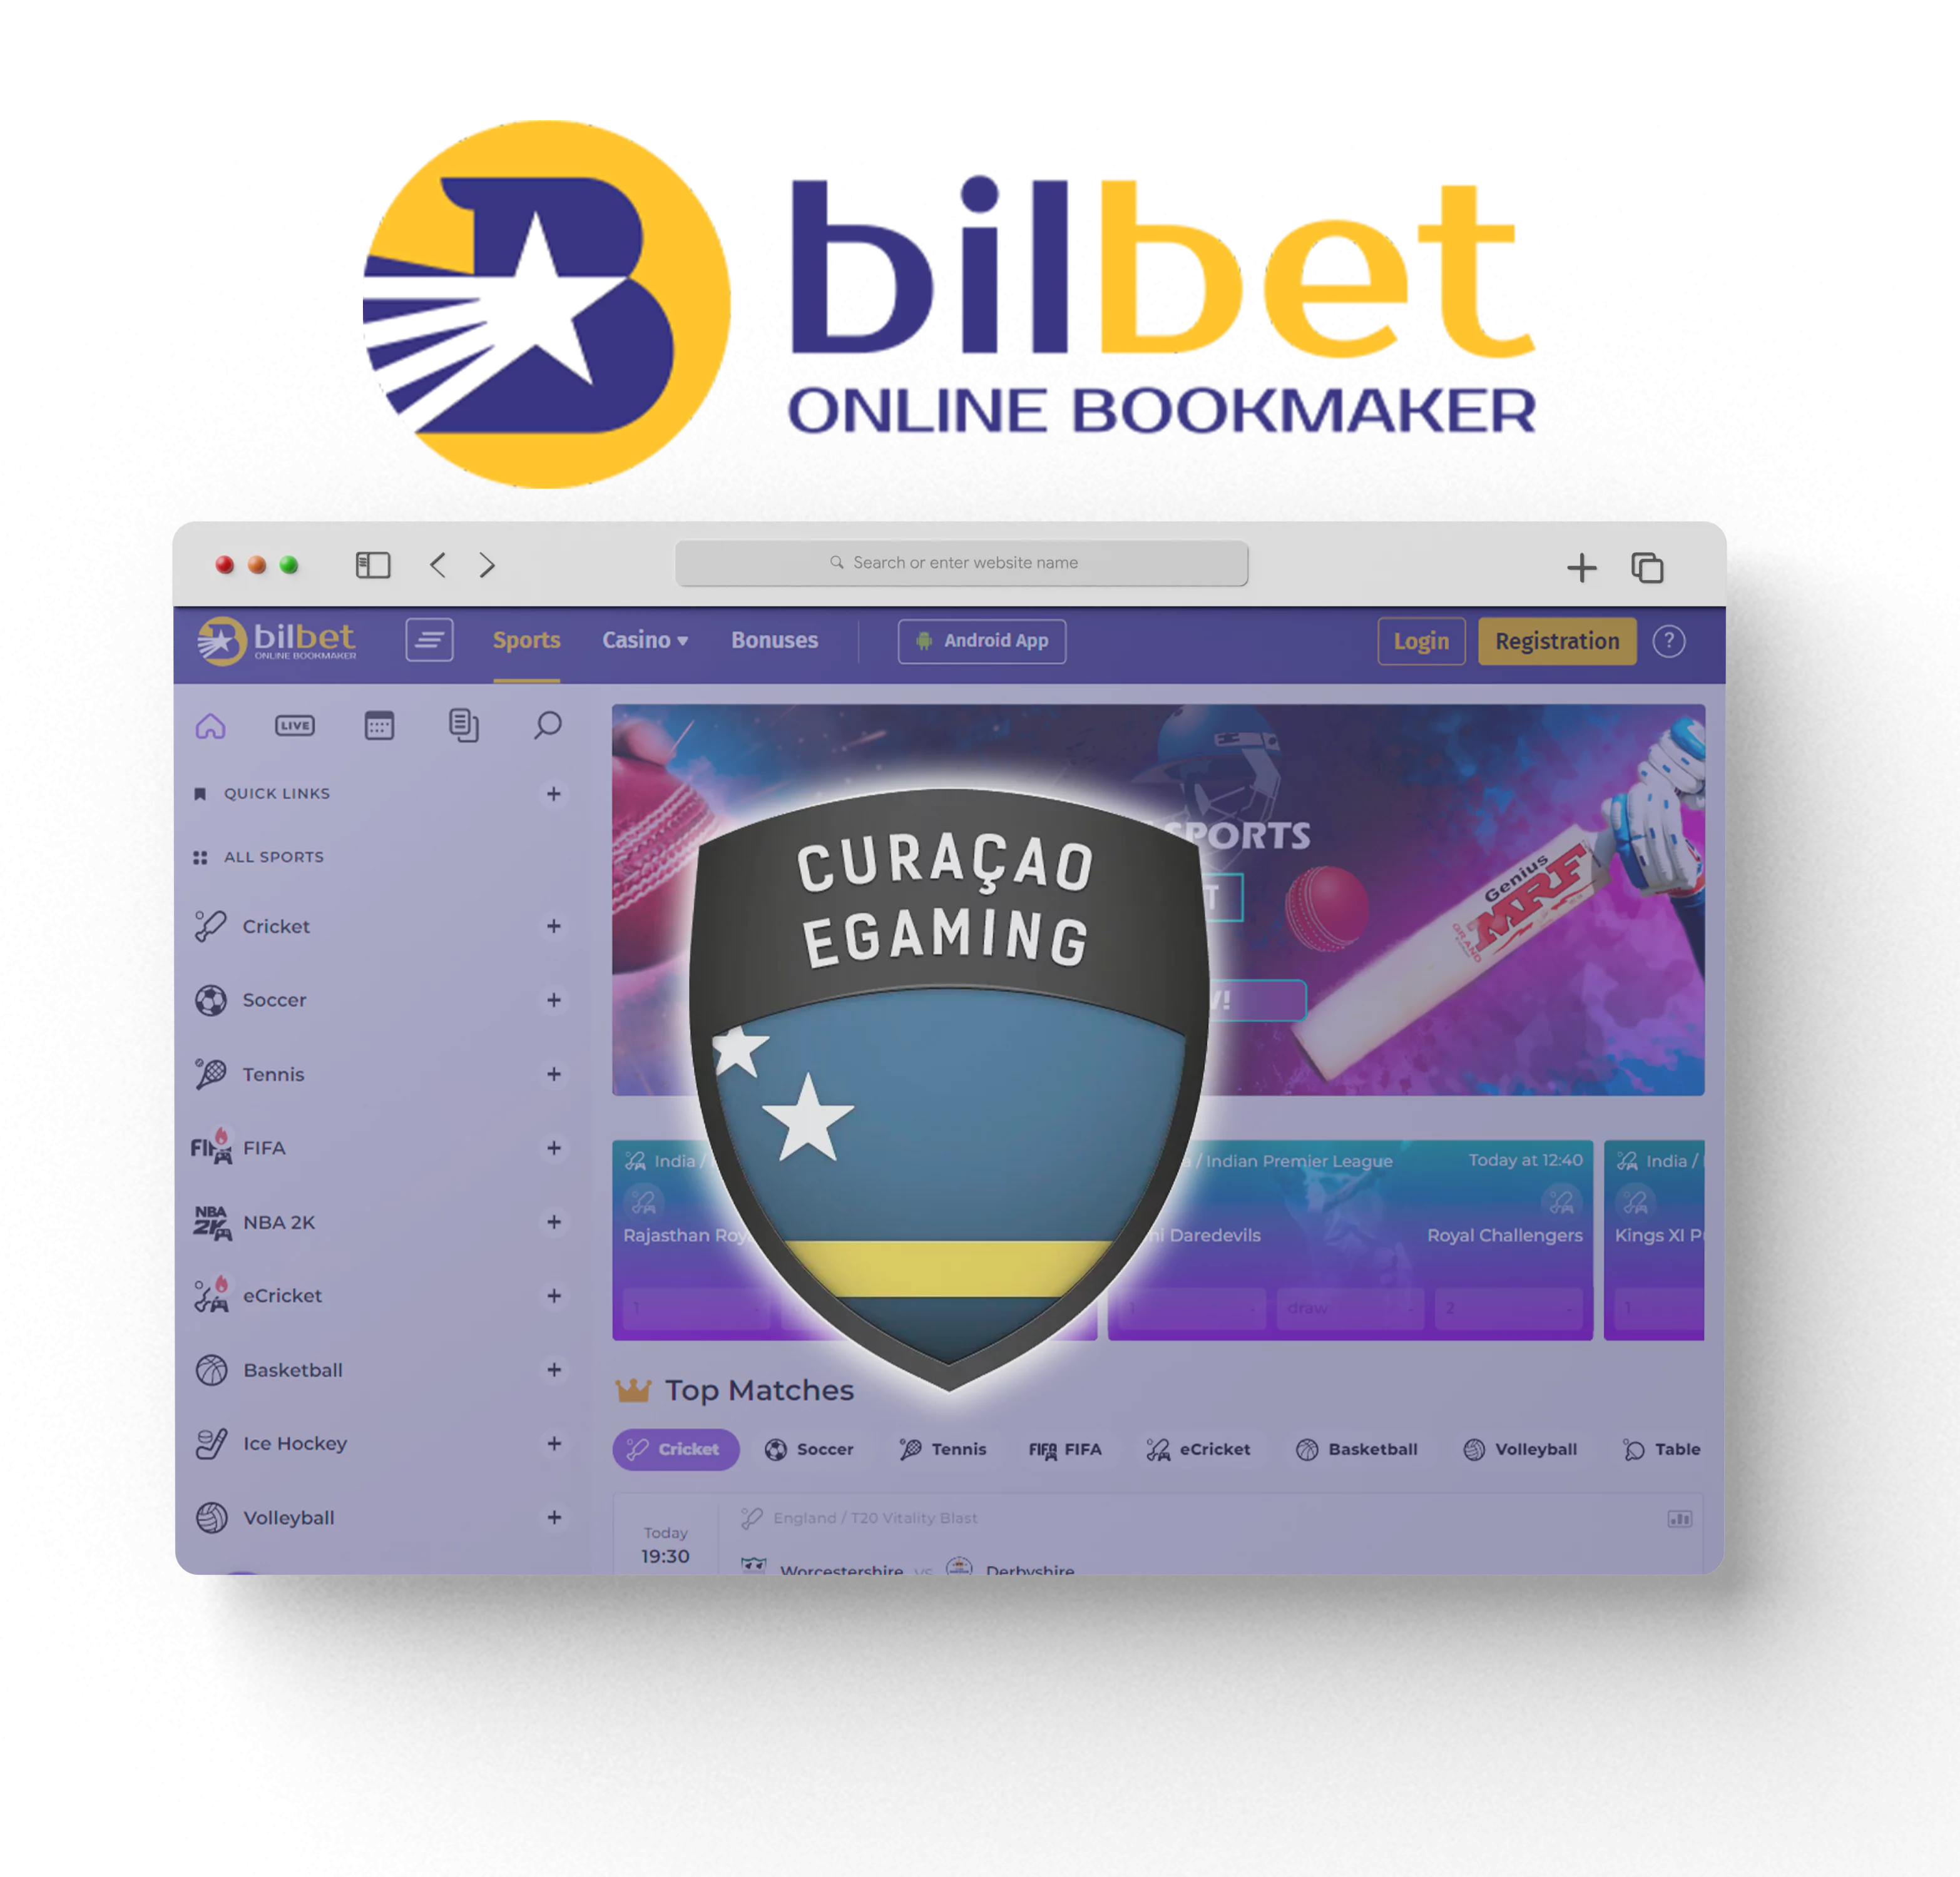 Bilbet is a licensed bookmaker and is regulated by the Curacao eGaming.